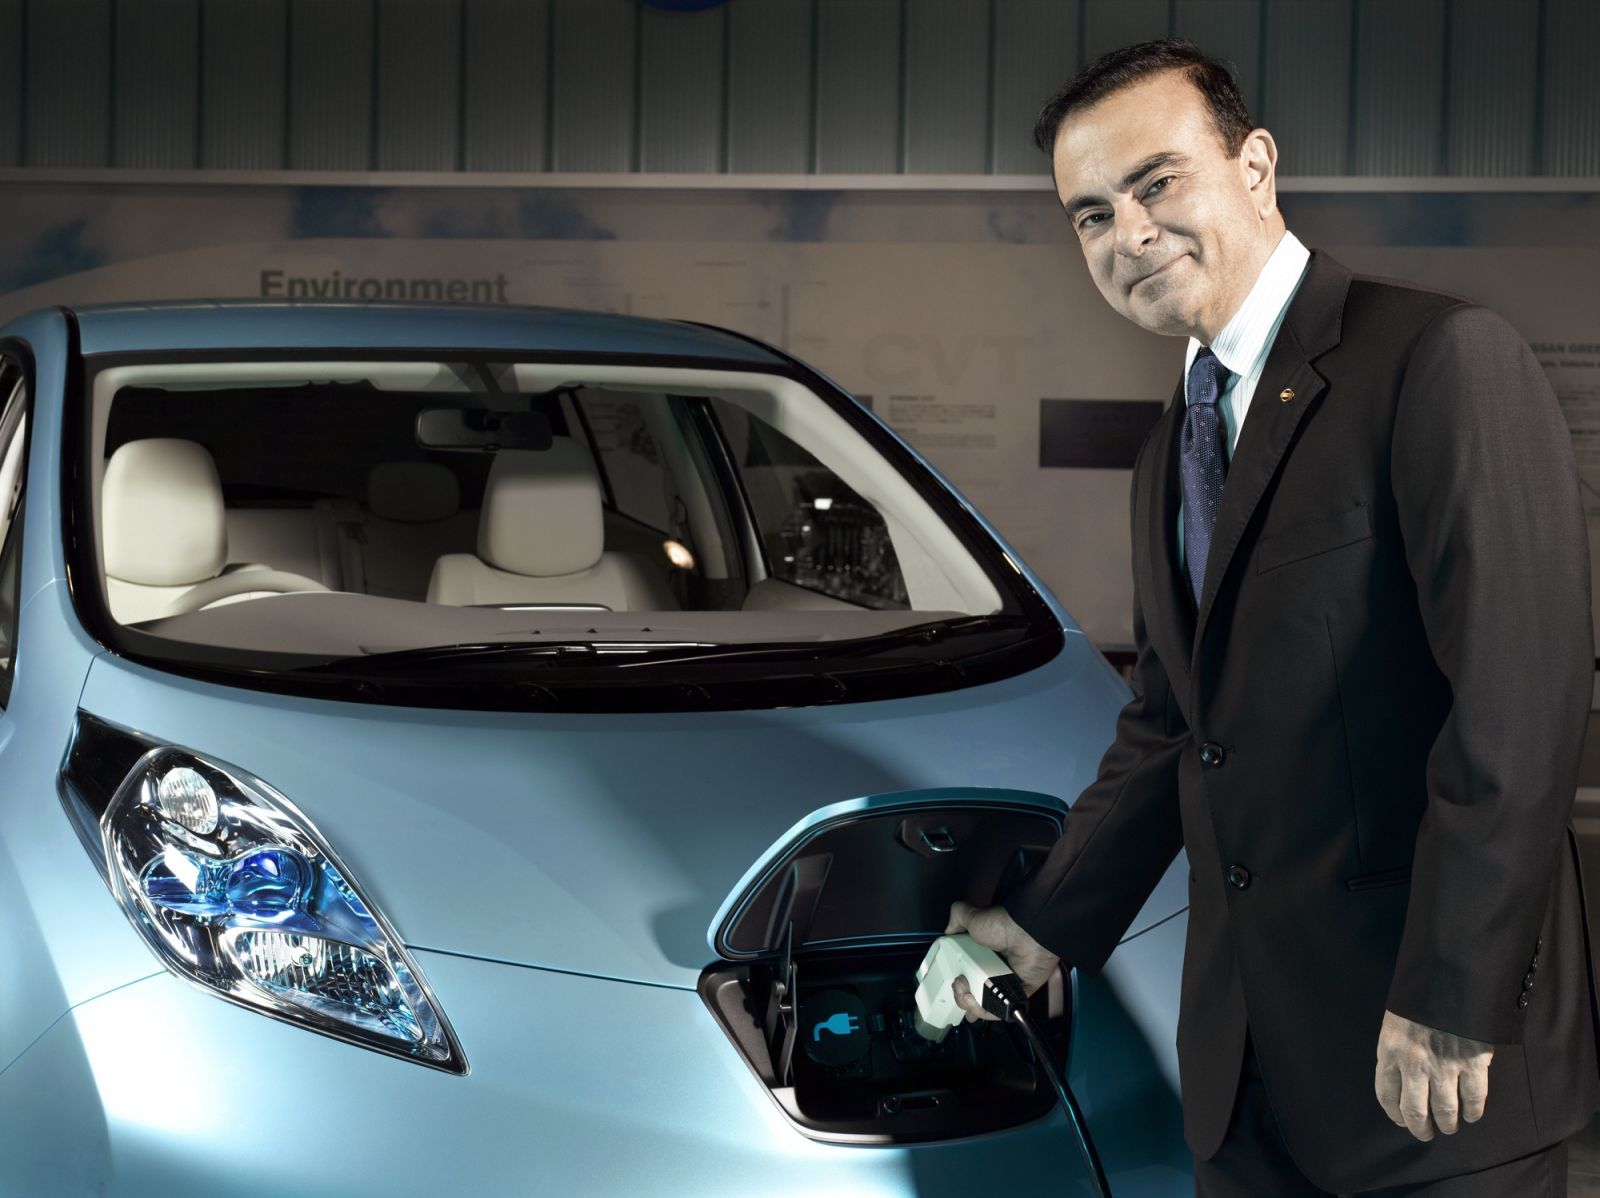 Carlos Ghosn tenure extended in Renault as Chairman CEO for next 4-years